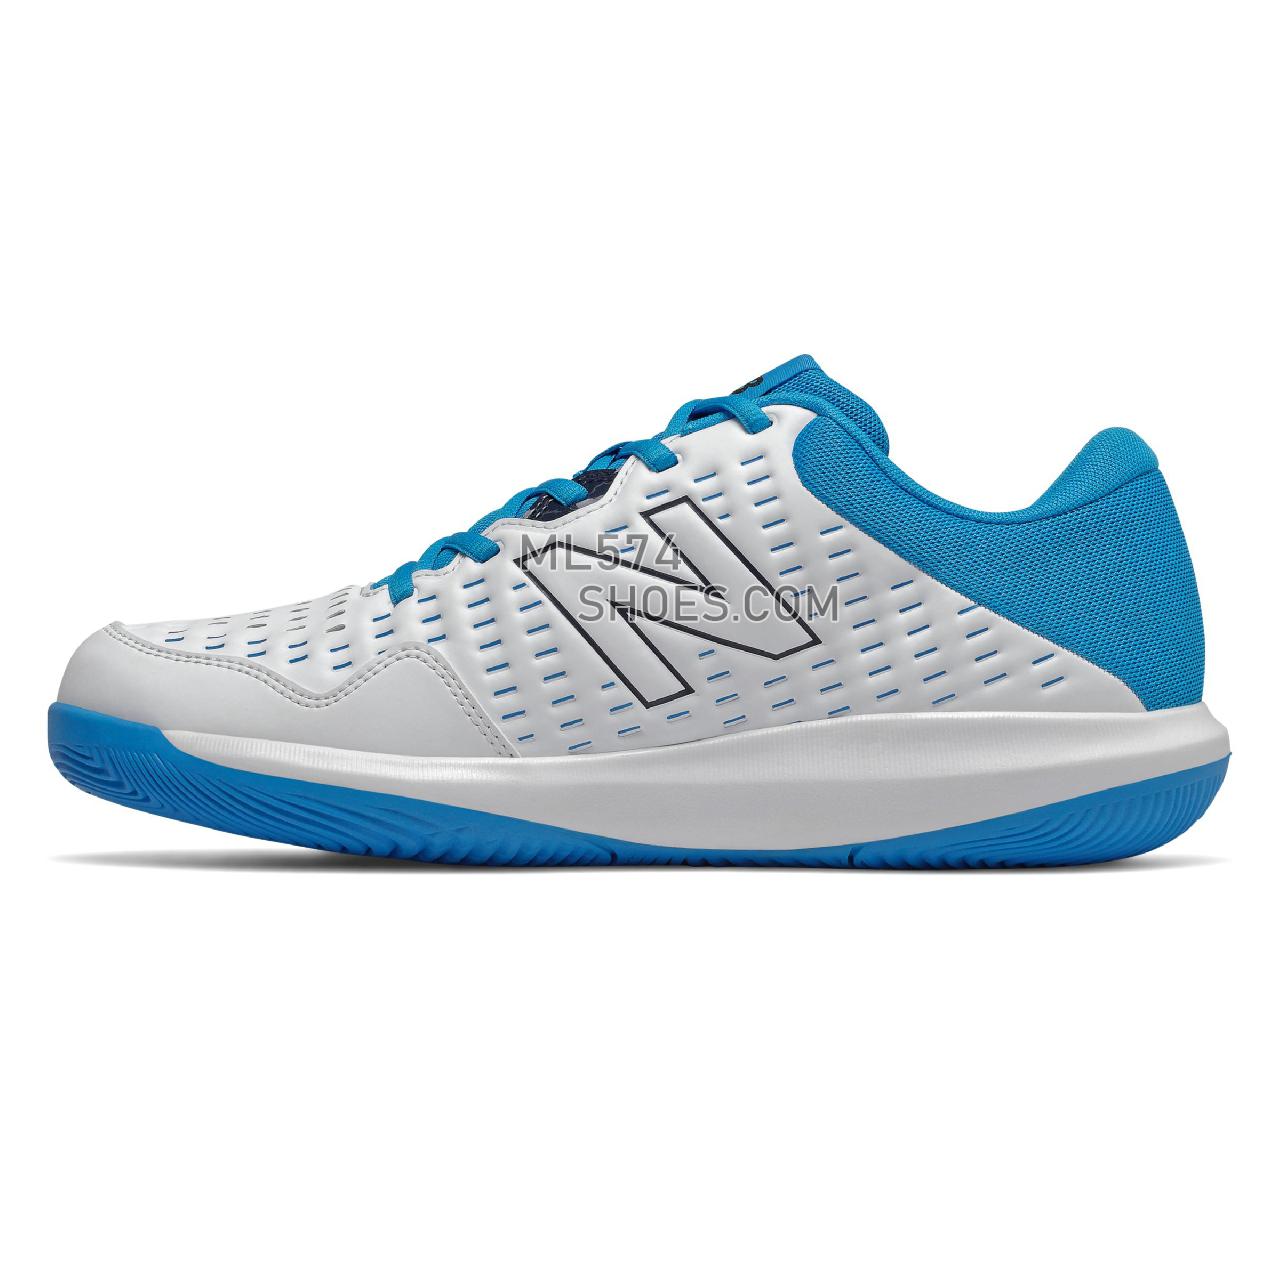 New Balance 696v4 - Men's Tennis - White with Blue and Black - MCH696R4